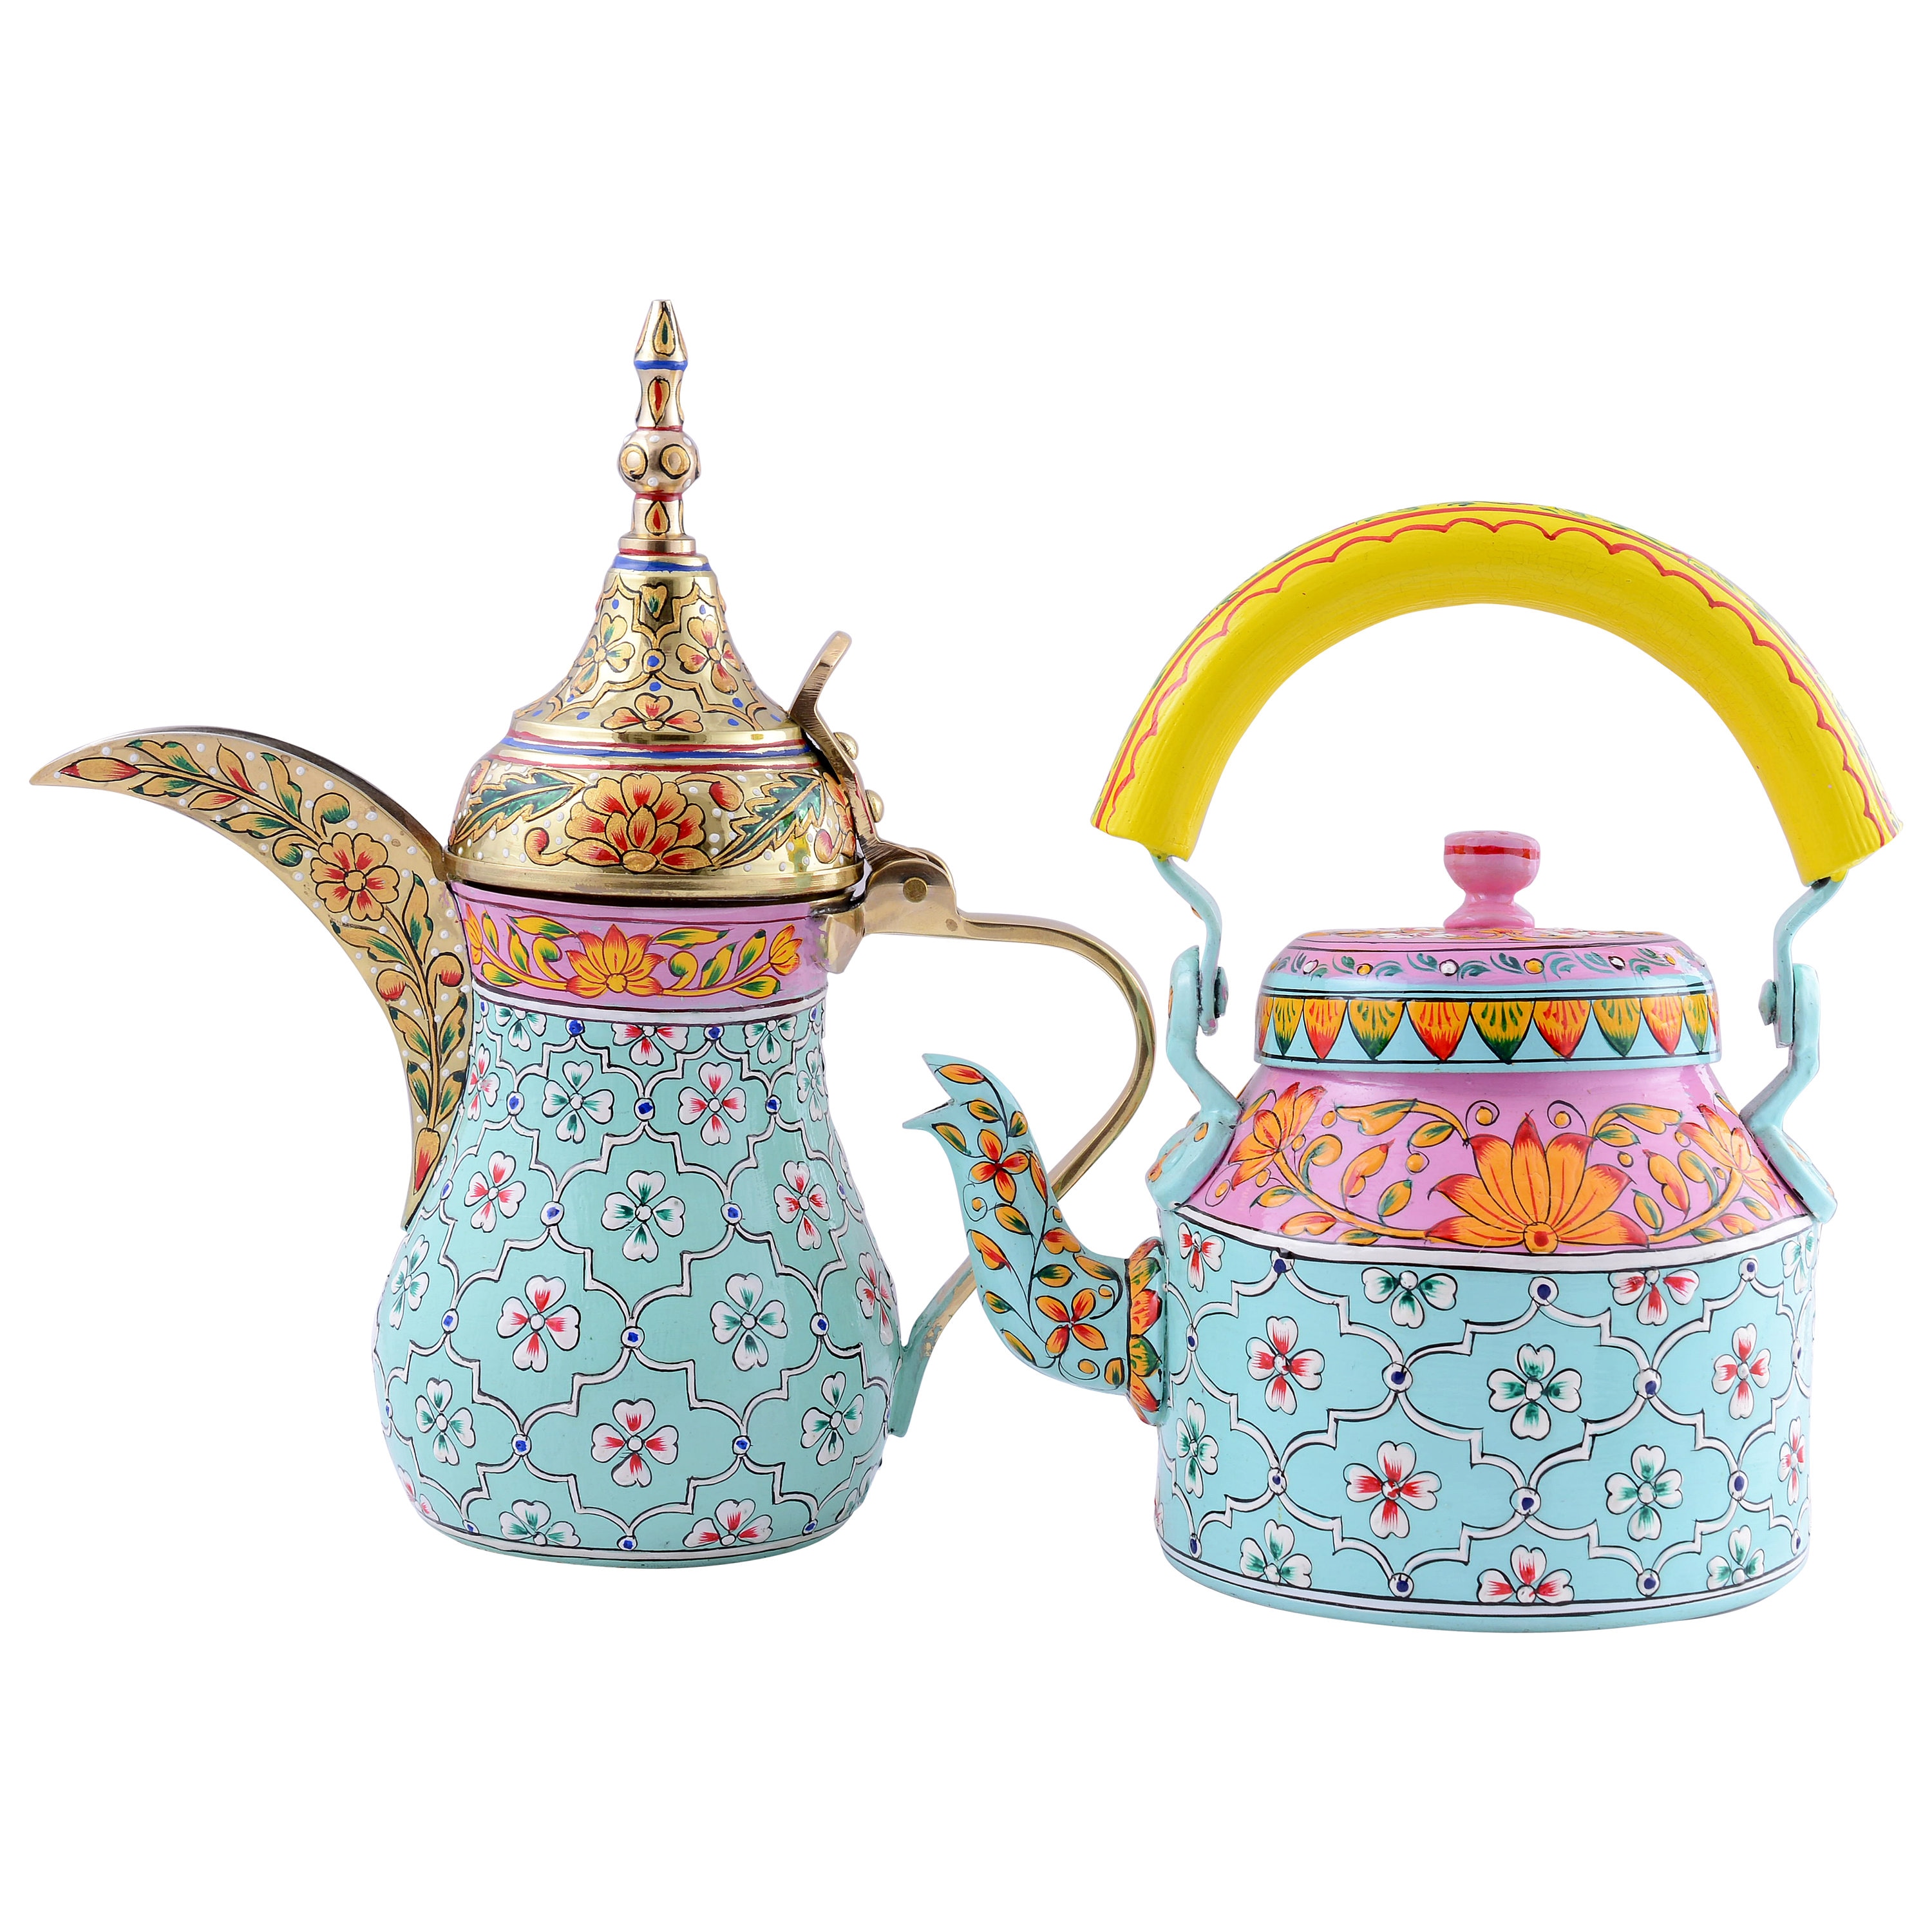 Electric Tea Kettle Hot Water Kettle for Tea and Coffee, Kaushalam Hand  Painted Kashmiri Art Kettles, Fathers Day Gift for Art Tea Lovers, -   Israel